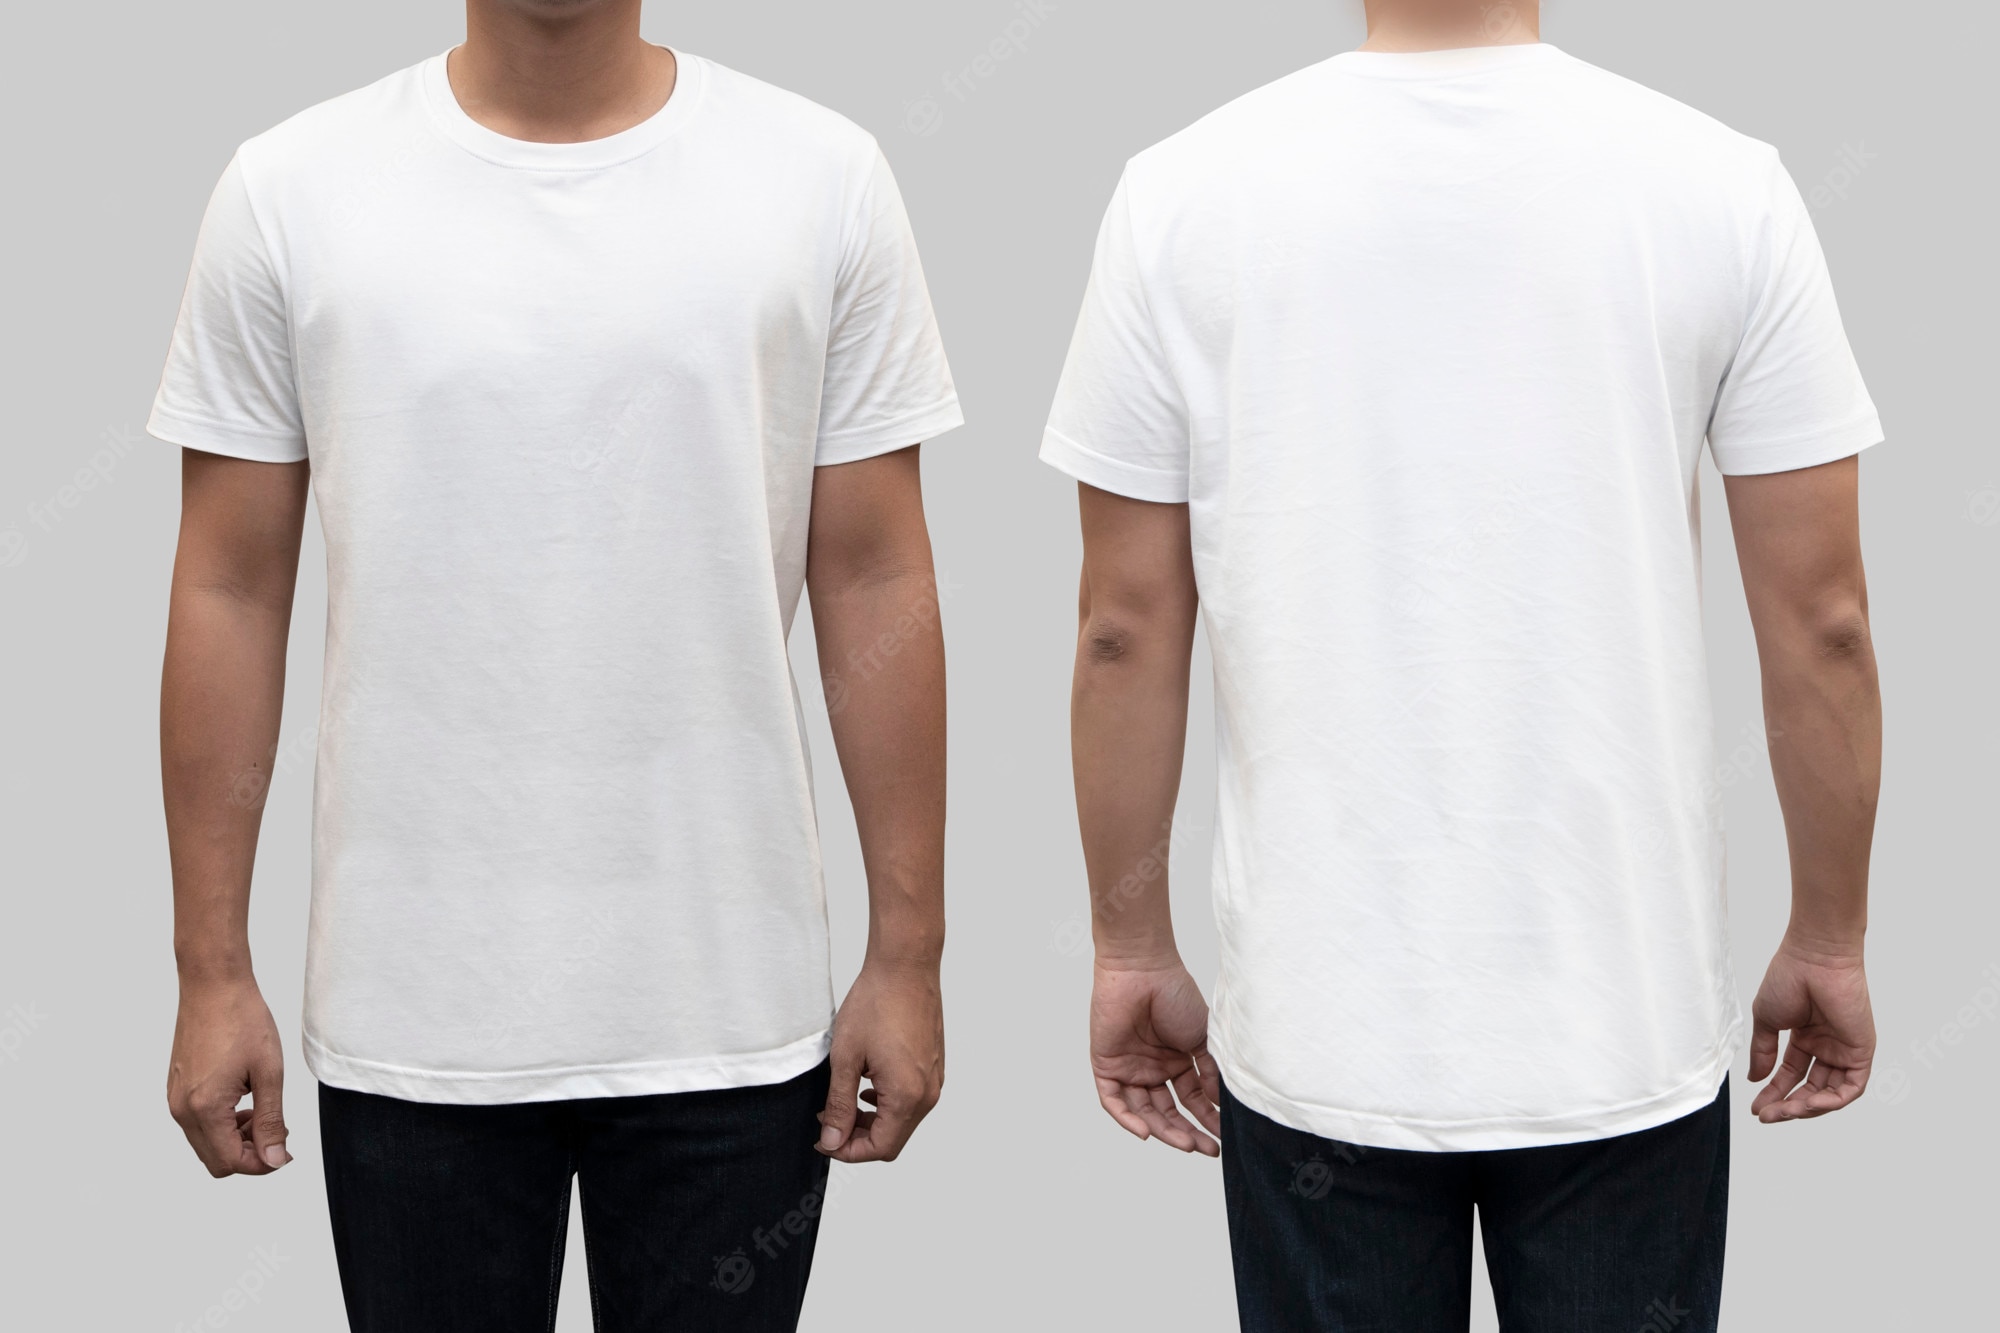 Detail Front And Back T Shirt Template Nomer 6